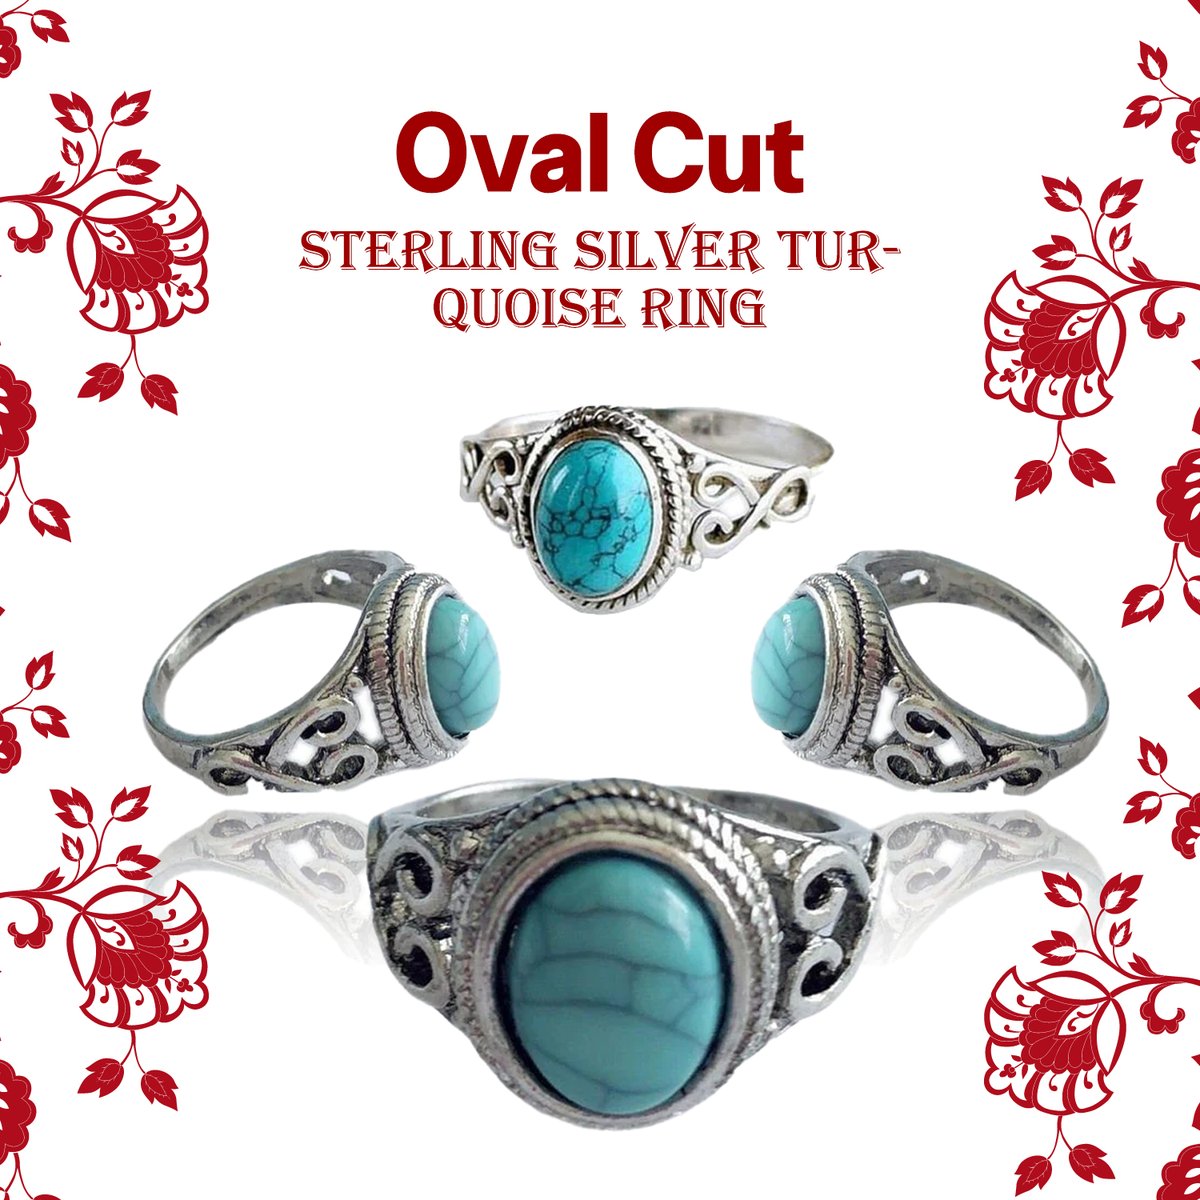 Exquisite Oval Cut Sterling Silver Turquoise Ring with Detailed Filigree Design | Luxurious Ring.

SHOP HERE: 531giftshop.com/collections/ri…

.
.
.
.
.
.
.
.
.
.
.

#TurquoiseJewelry
#SterlingSilver
#FiligreeDesign
#LuxuryRing
#HandcraftedGems